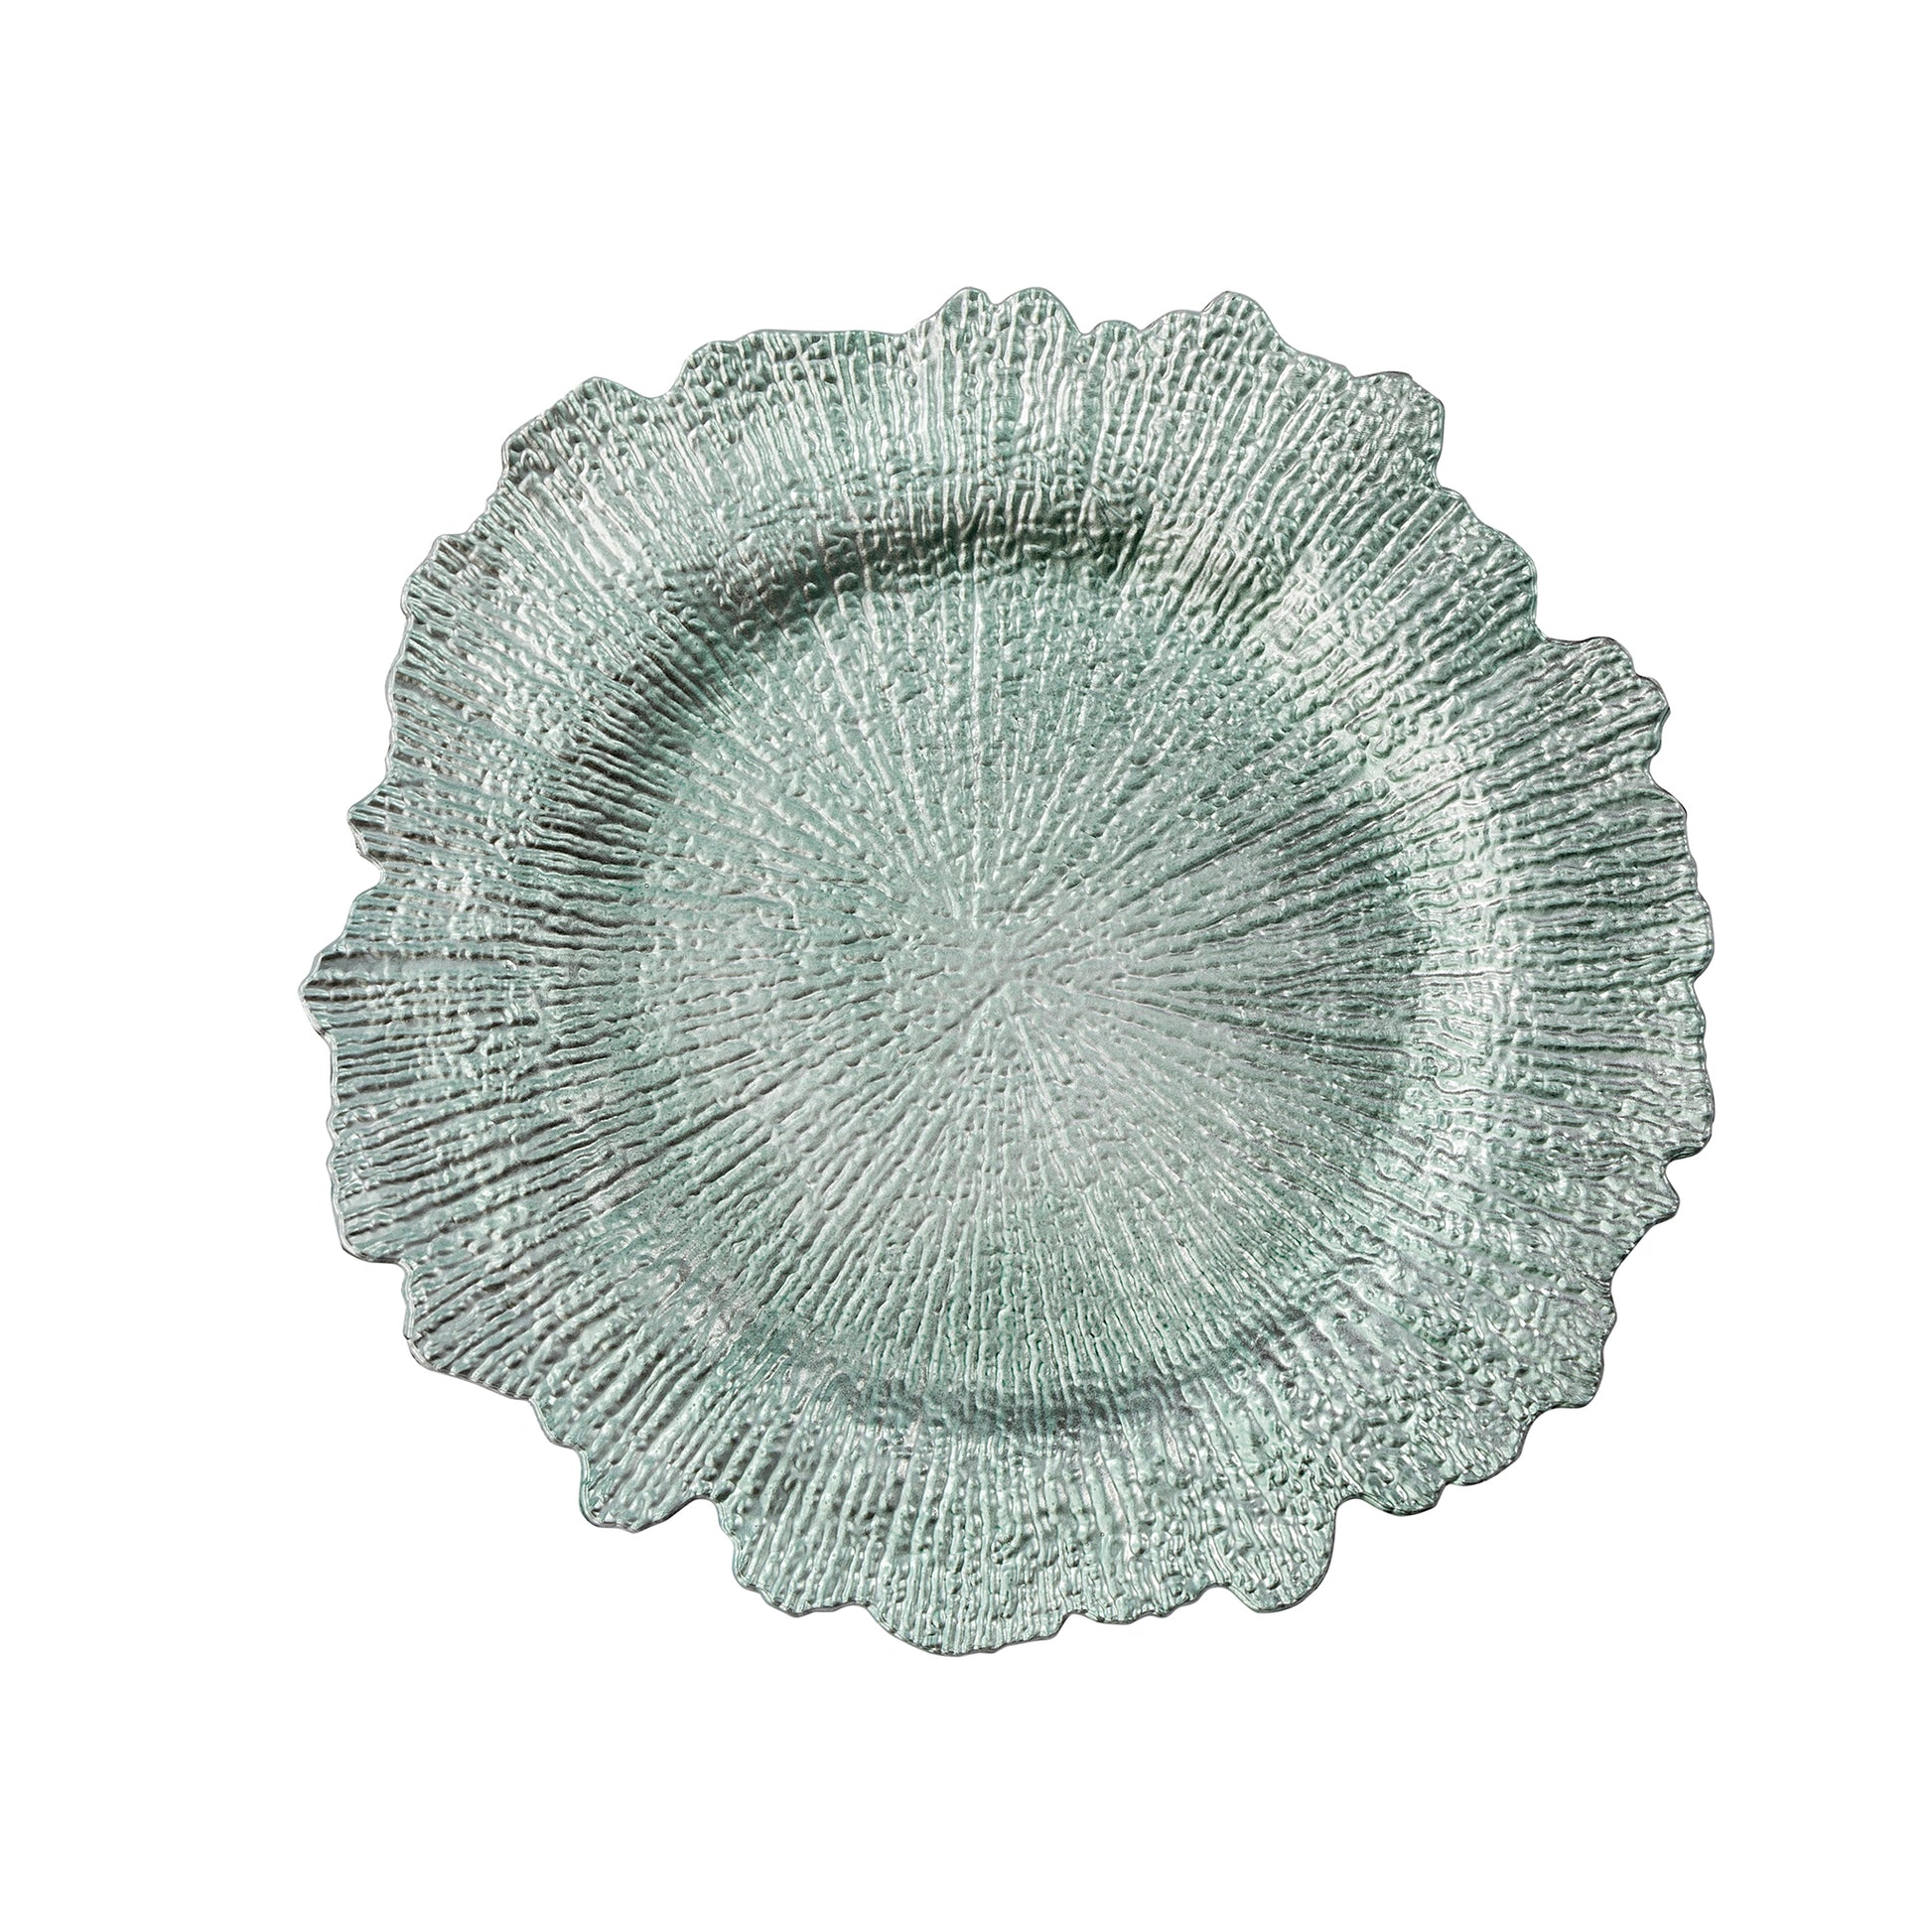 Reef Acrylic Plastic Charger Plate - Light Turquoise